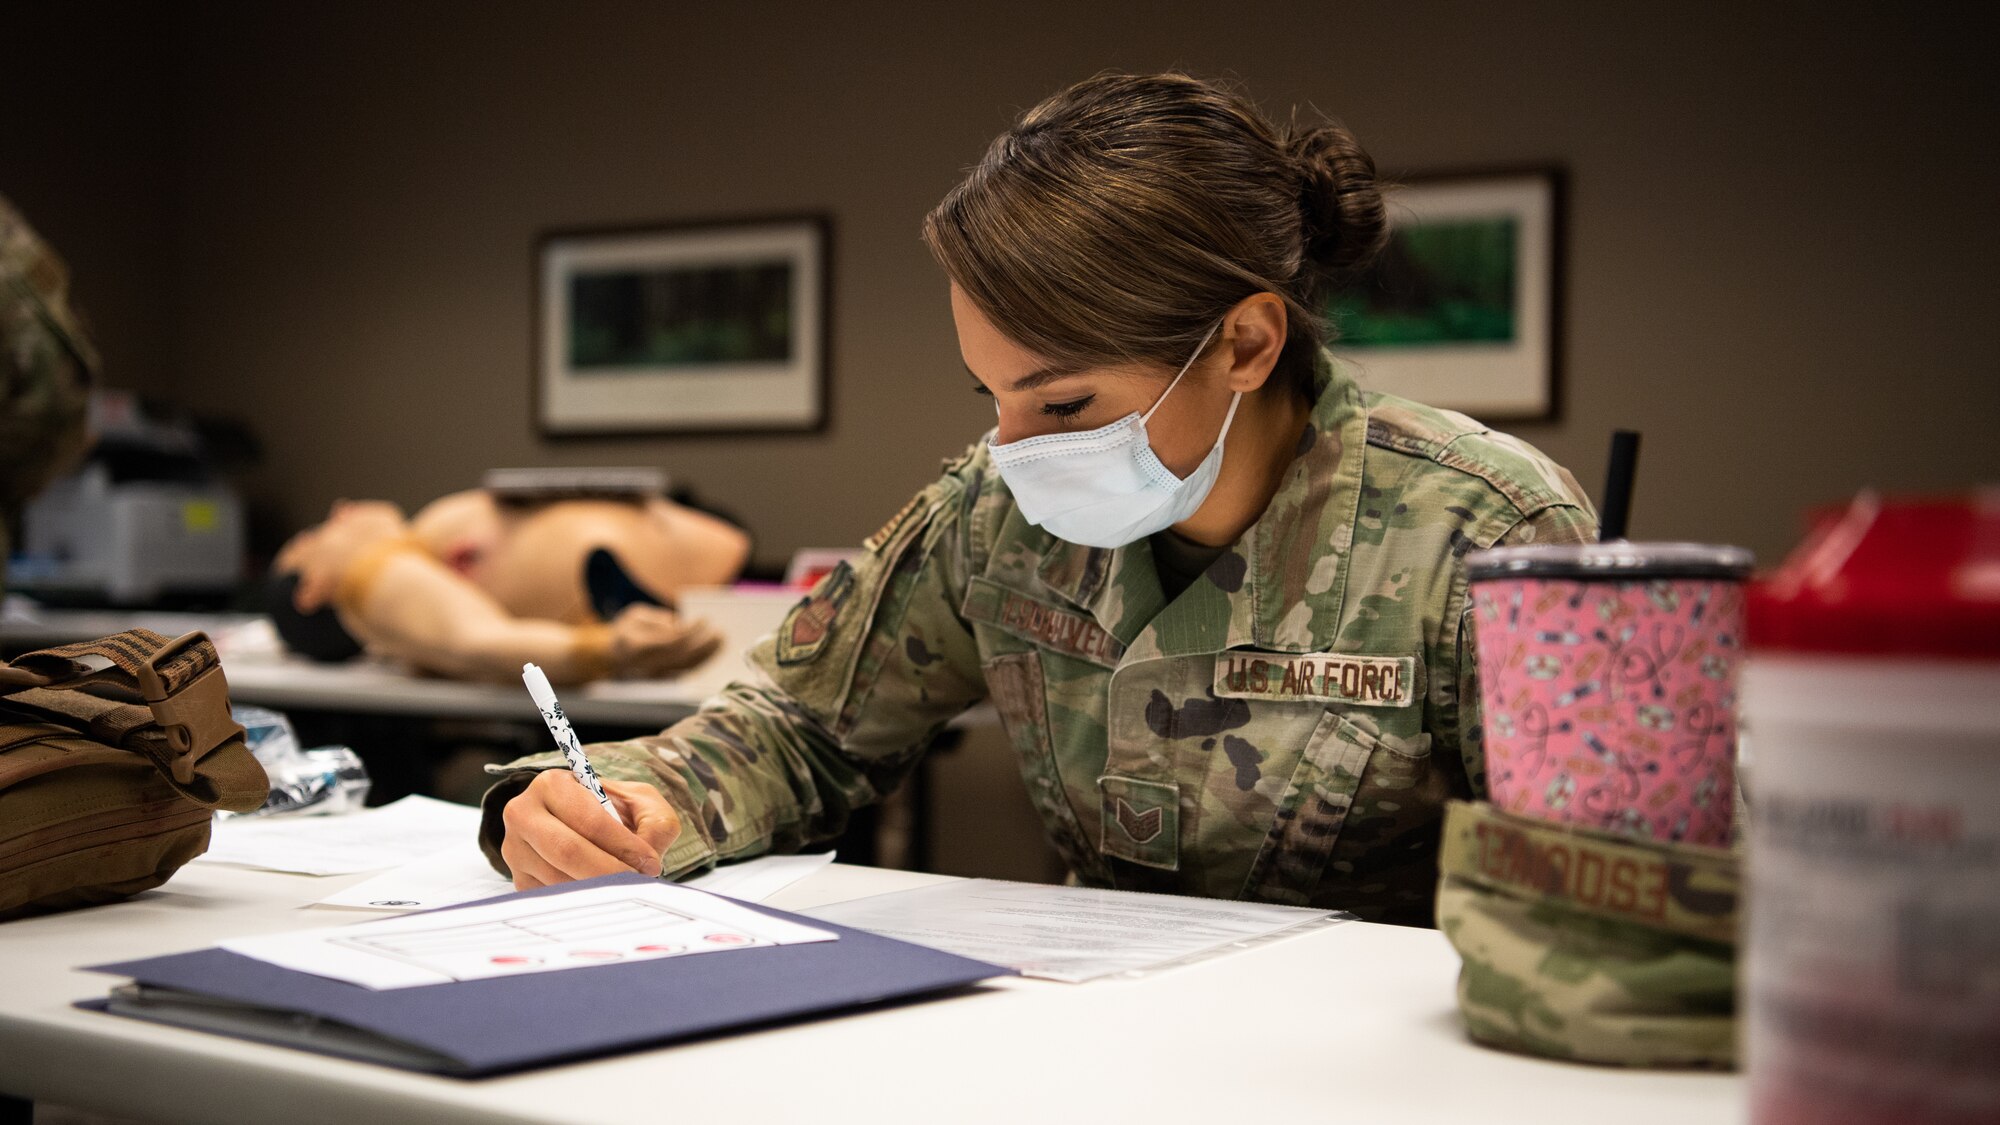 Staff Sgt. Johanna Esquivel, 2nd Operational Medical Readiness Squadron medical technician, takes a test during a Tactical Combat Casualty Care (TCCC) class at Barksdale Air Force Base, La., Dec. 7, 2020.